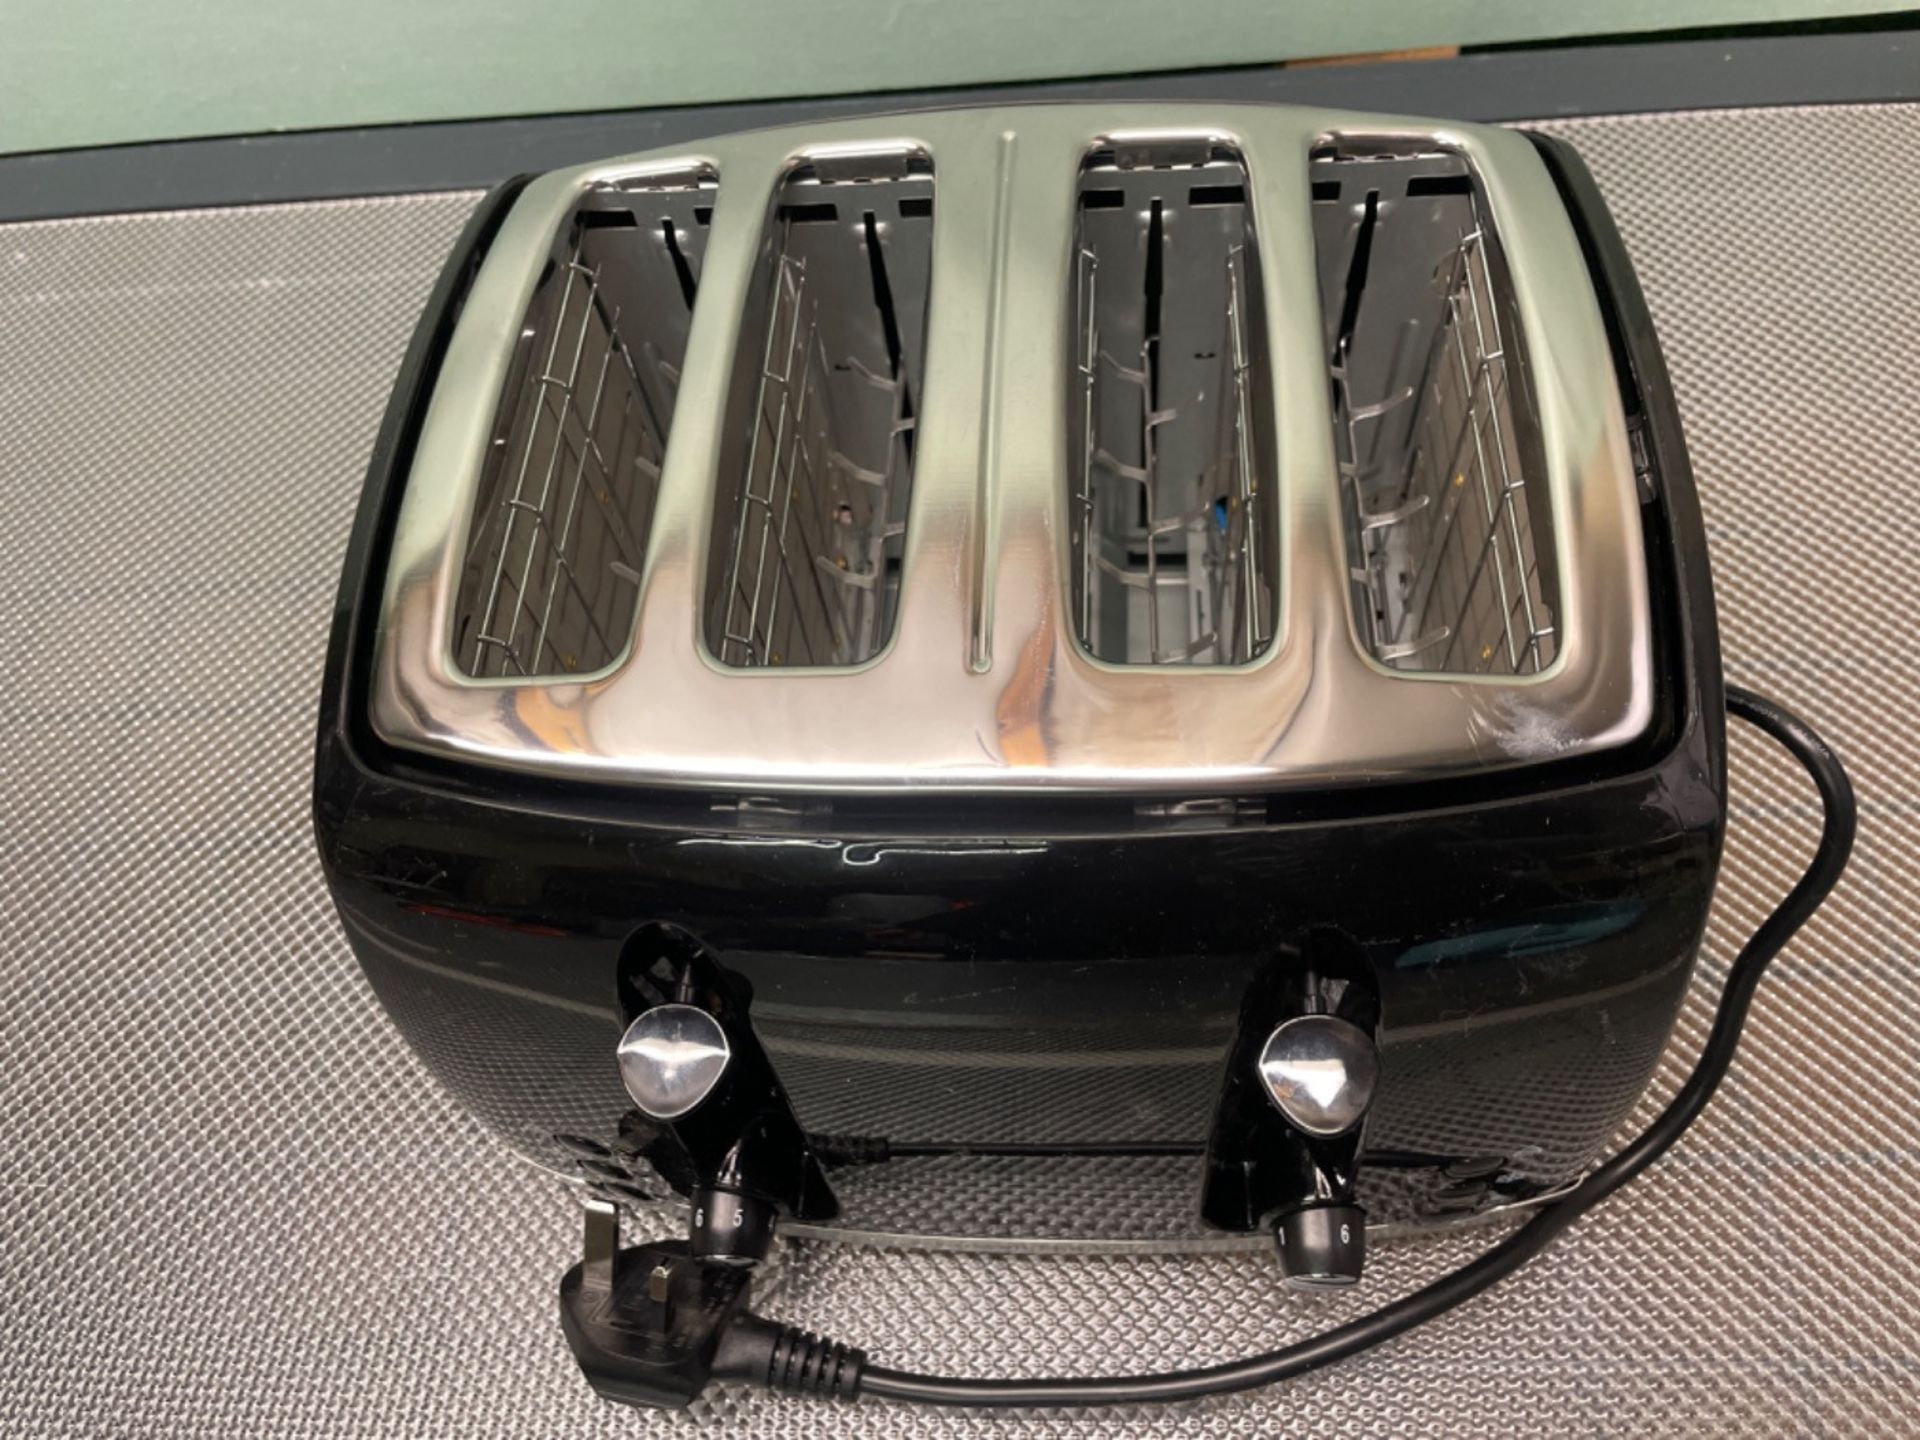 Russell Hobbs Honeycomb 4 Slice Toaster (Independent & Extra wide slots with high lift, 6 Browning  - Image 2 of 3